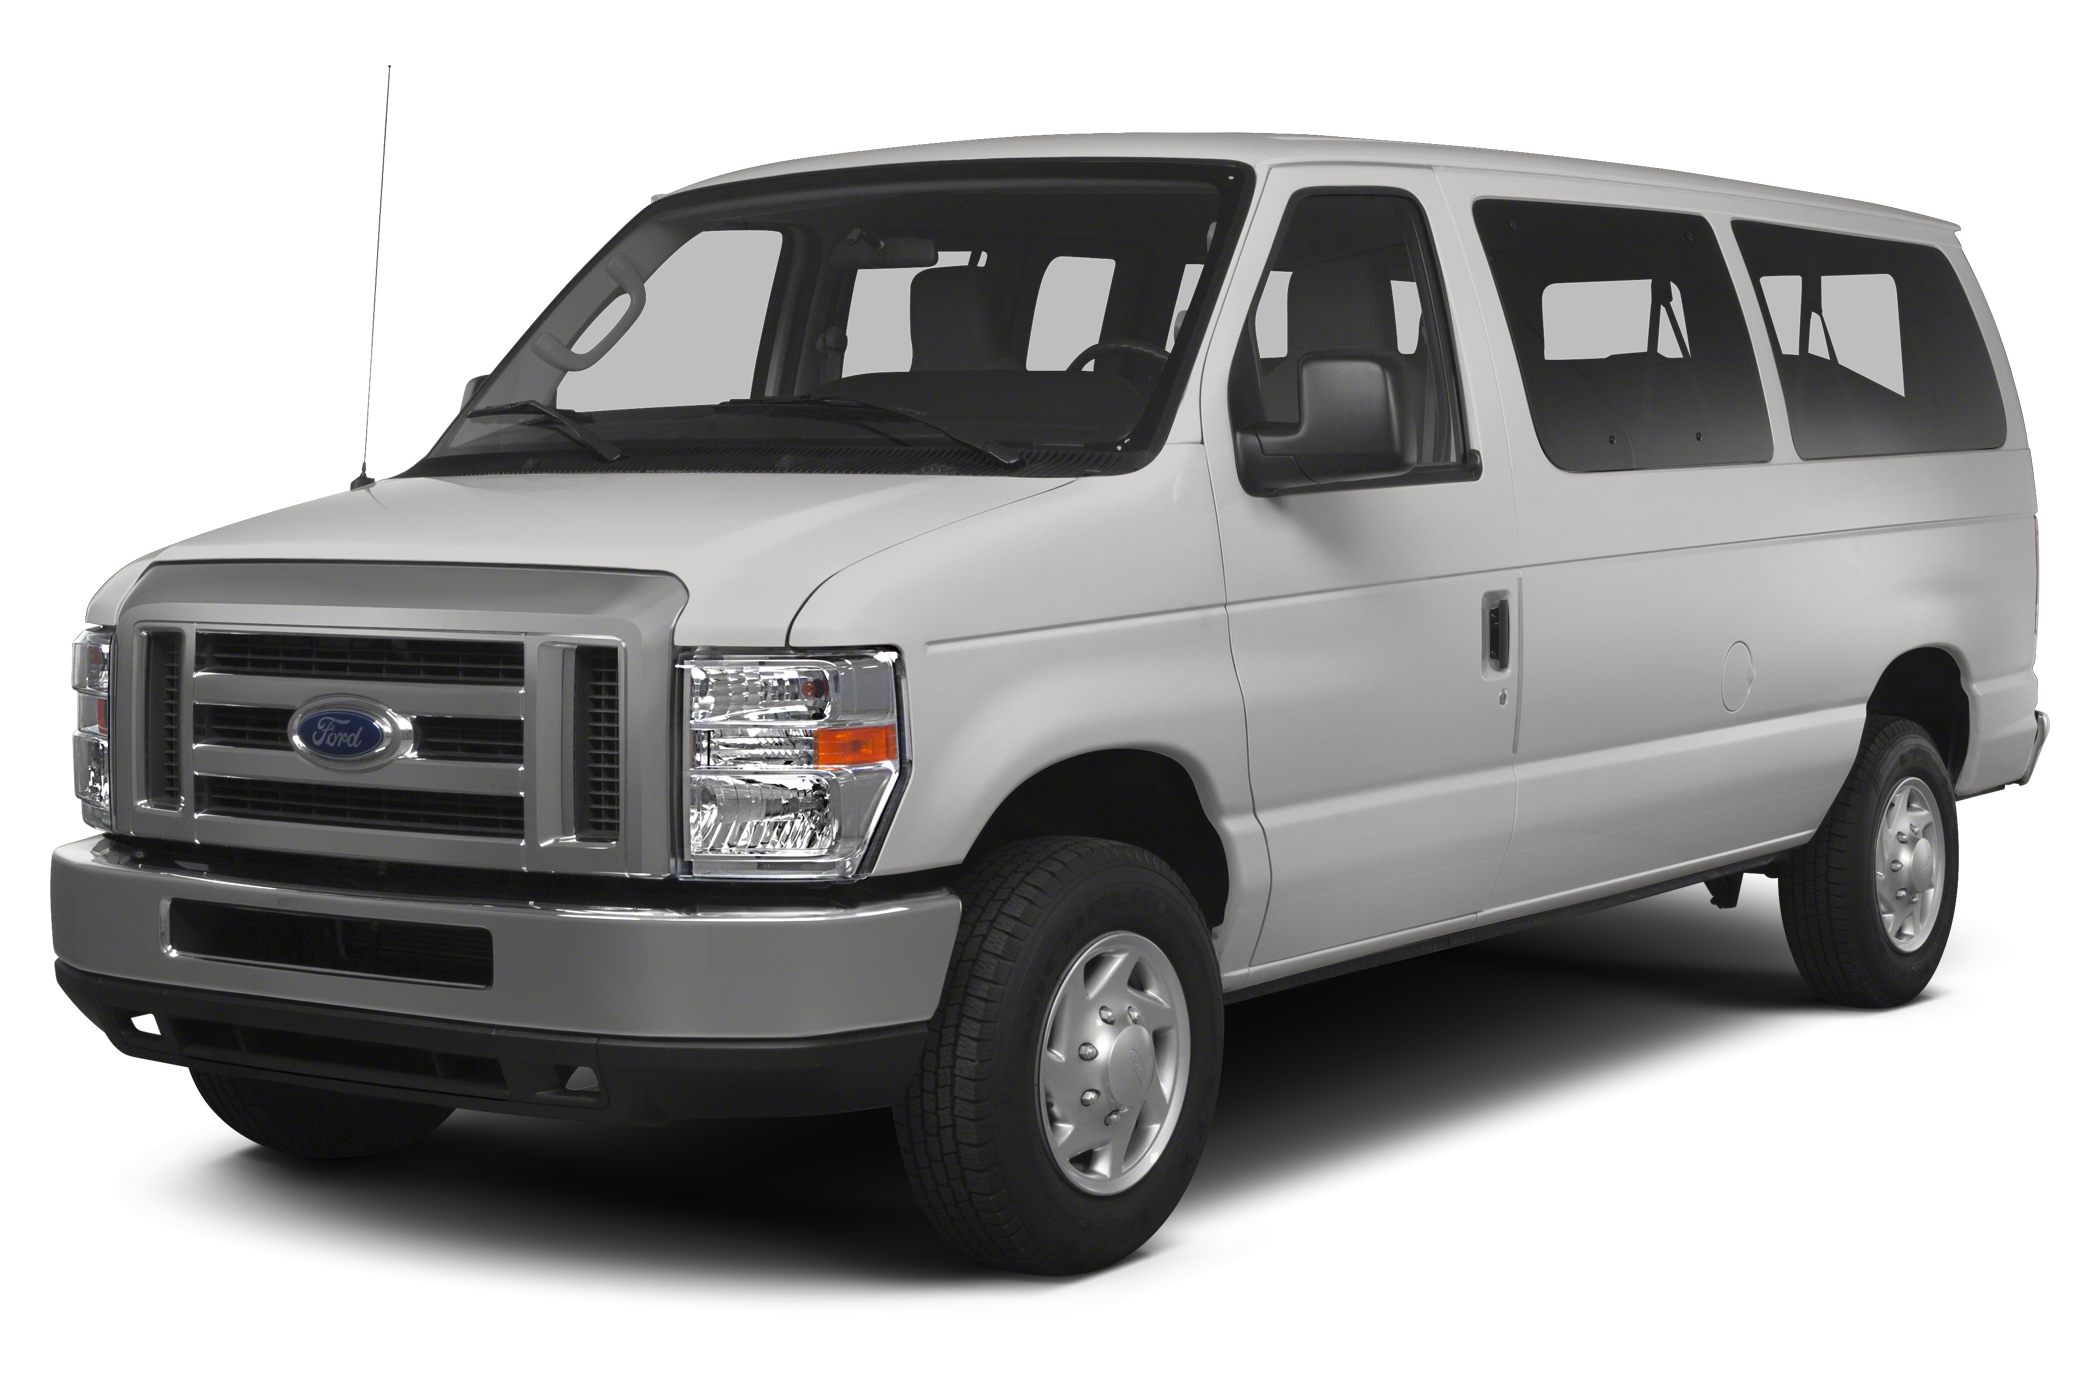 Chevy express ford e350 #5